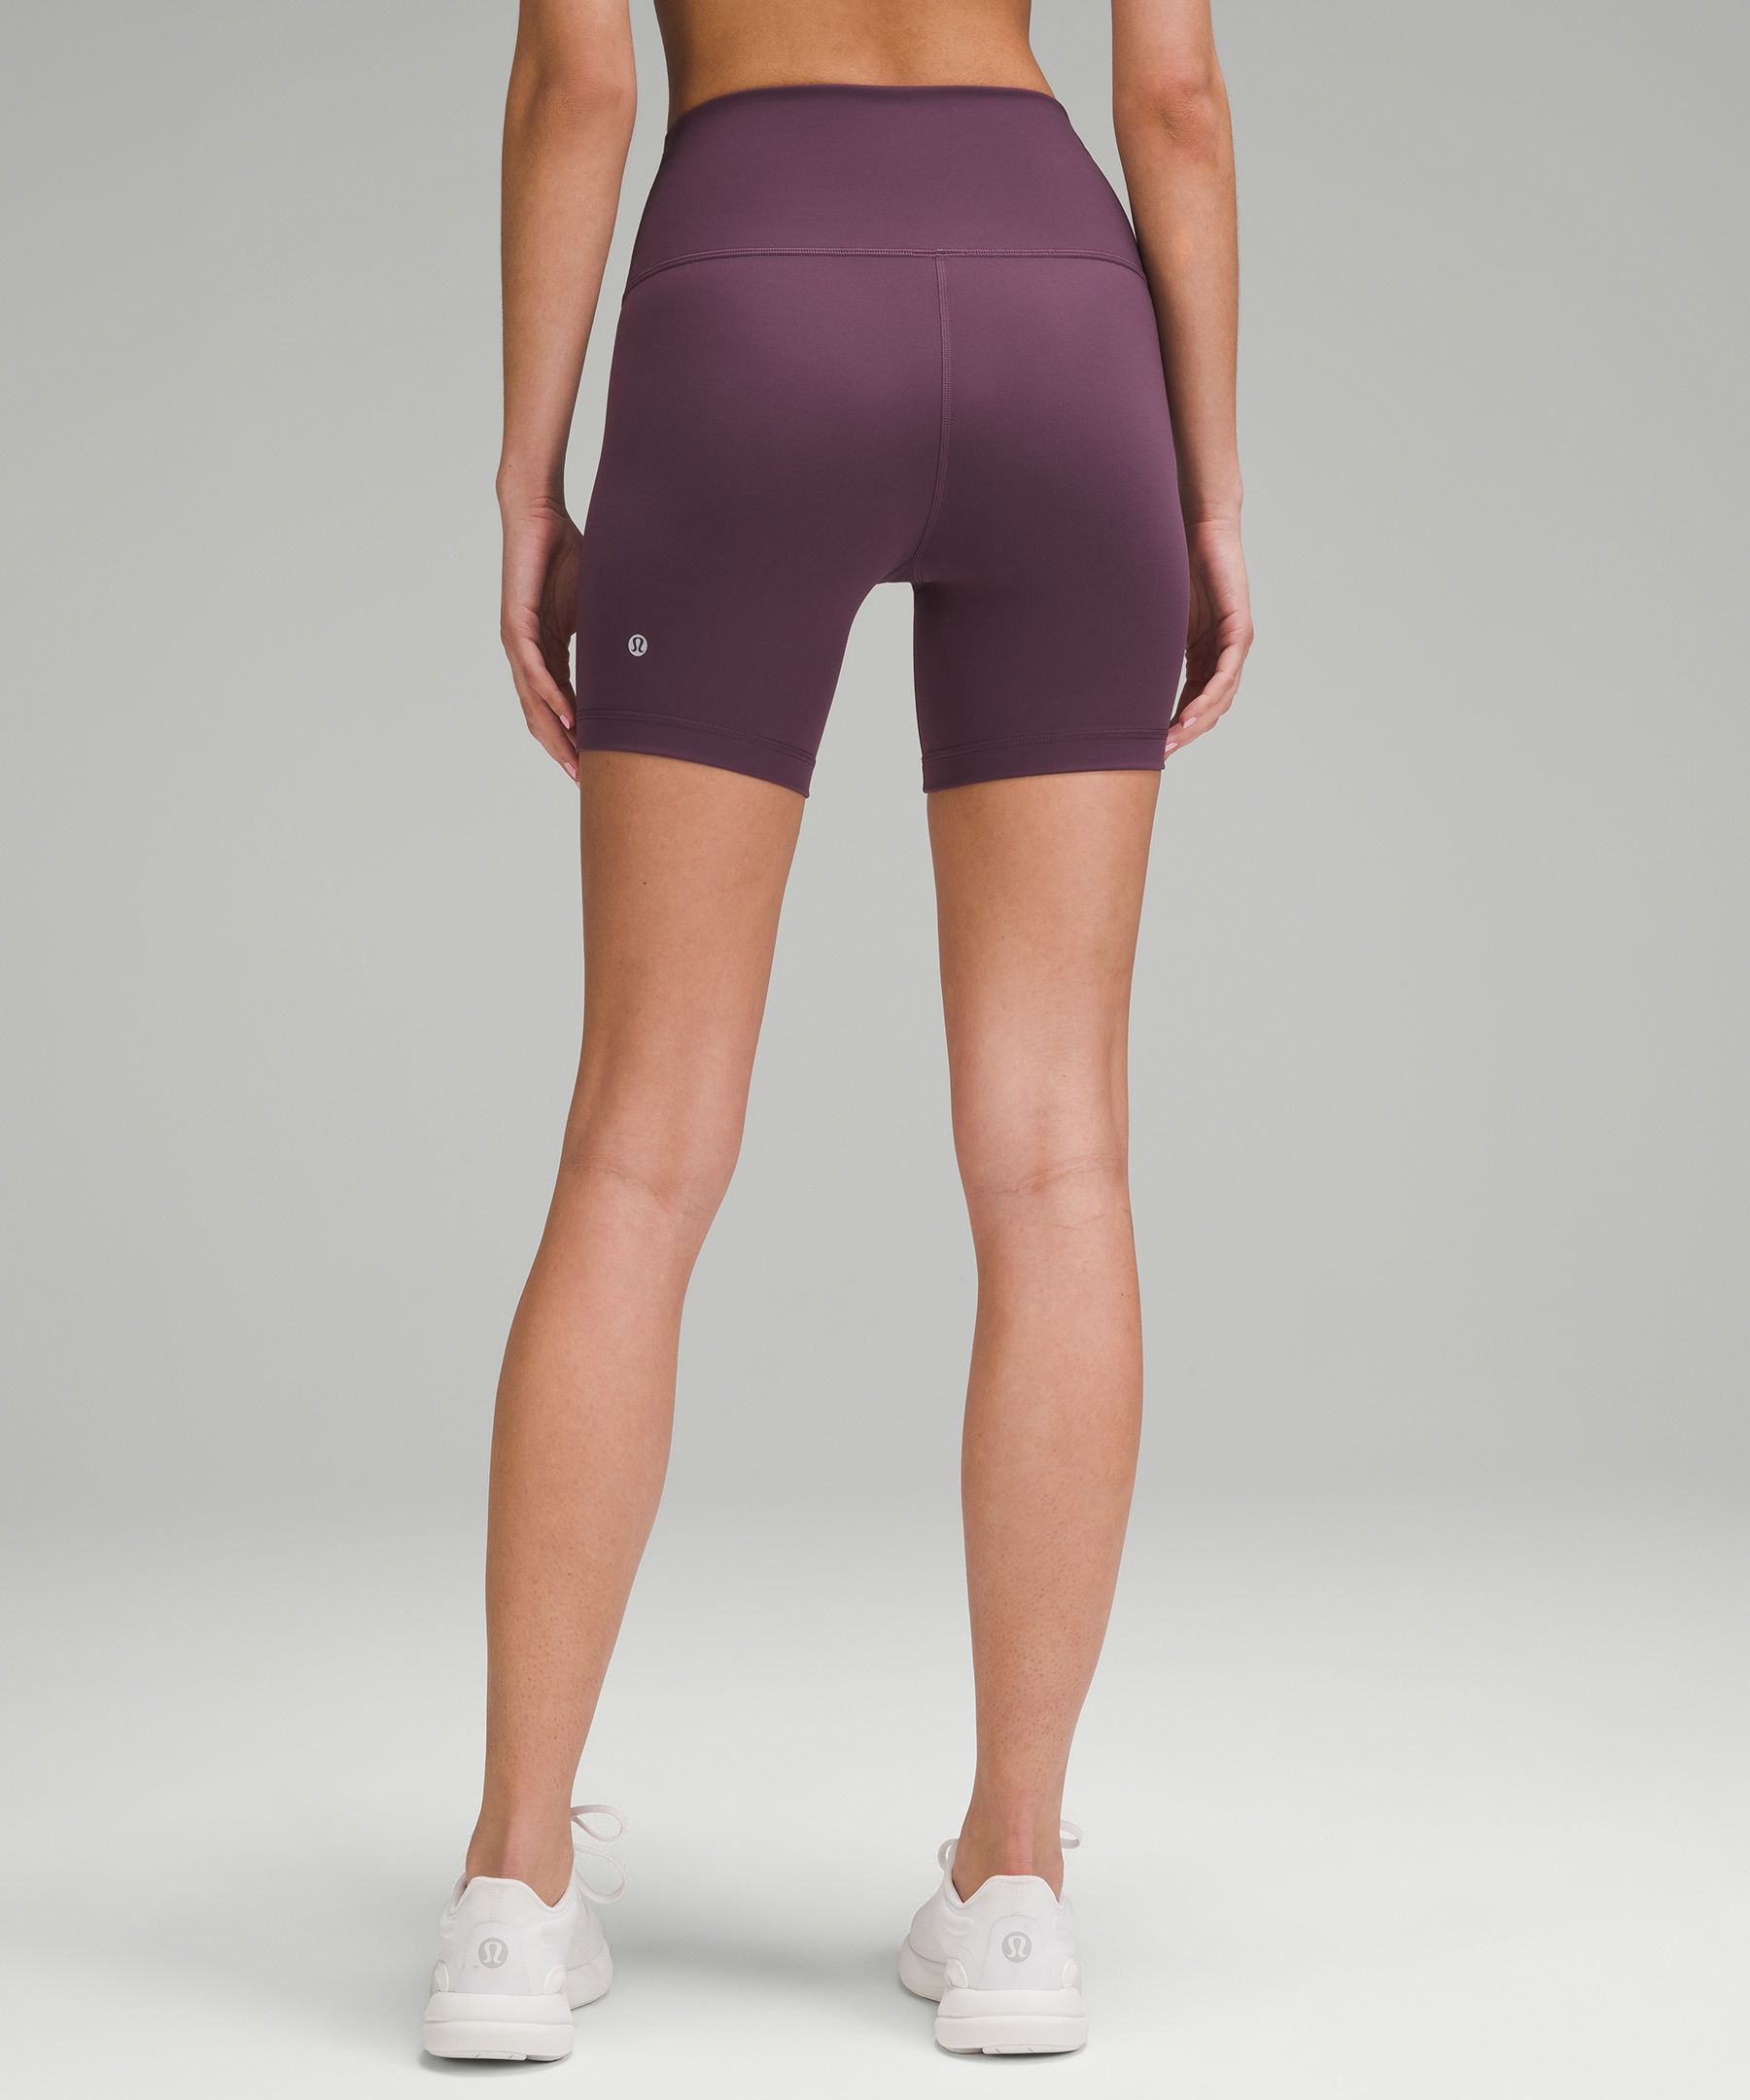 Lululemon Wunder Train High-Rise Short 4” Blue Size 6 - $38 (26% Off  Retail) - From Alex